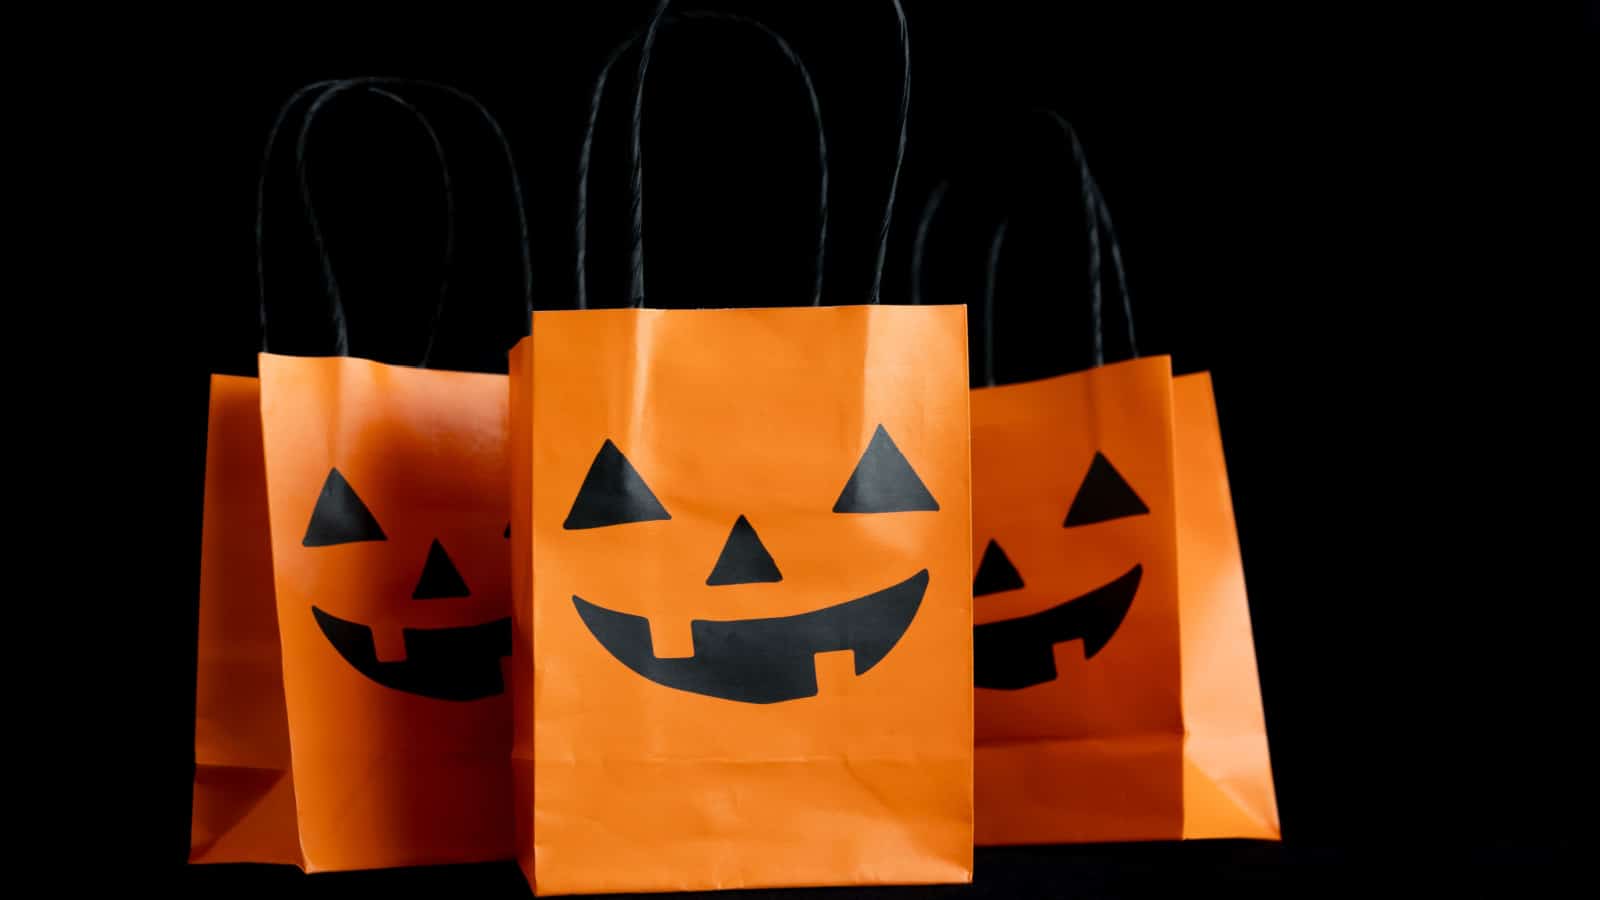 Halloween treat bags for trick-or-treating sweets candies. Paper gift bags with handles, for candy and other goodies. Decorated with spooky Jack-o'-lantern face. Trick or Treat party favor bags.